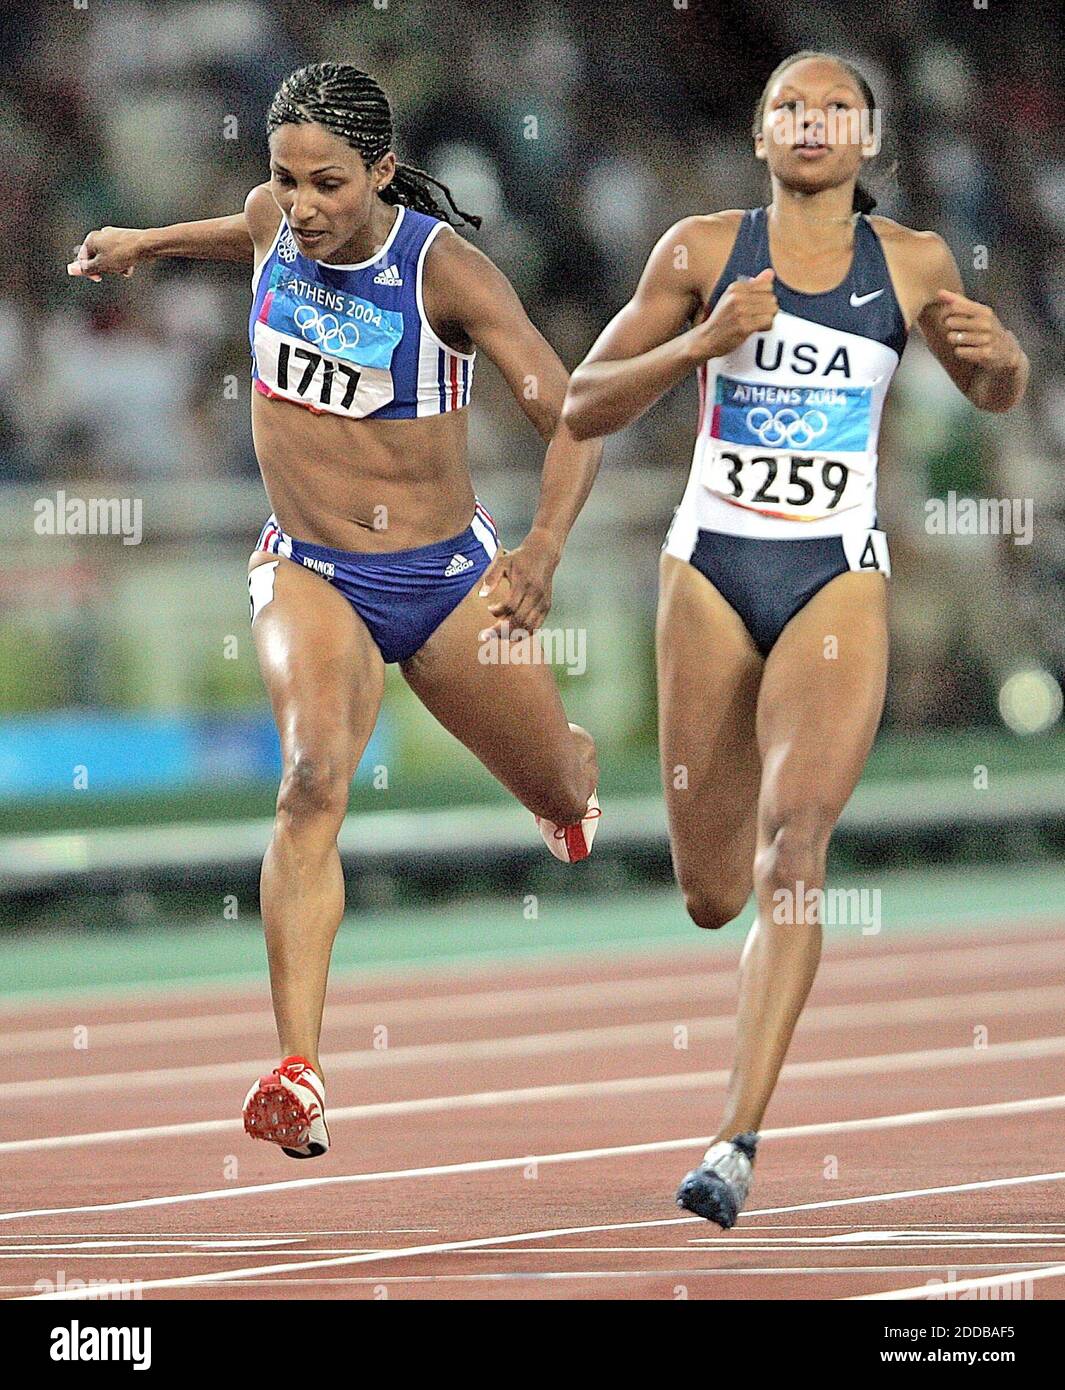 NO FILM, NO VIDEO, NO TV, NO DOCUMENTARY - Christine Arron of France, left, and Allyson Felix of the United States cross the finish line in the 200 meters in the 2004 Olympic Games on Monday, August 23, 2004. Photo by Al Diaz/Miami Herald Press/KRT/ABACA. Stock Photo